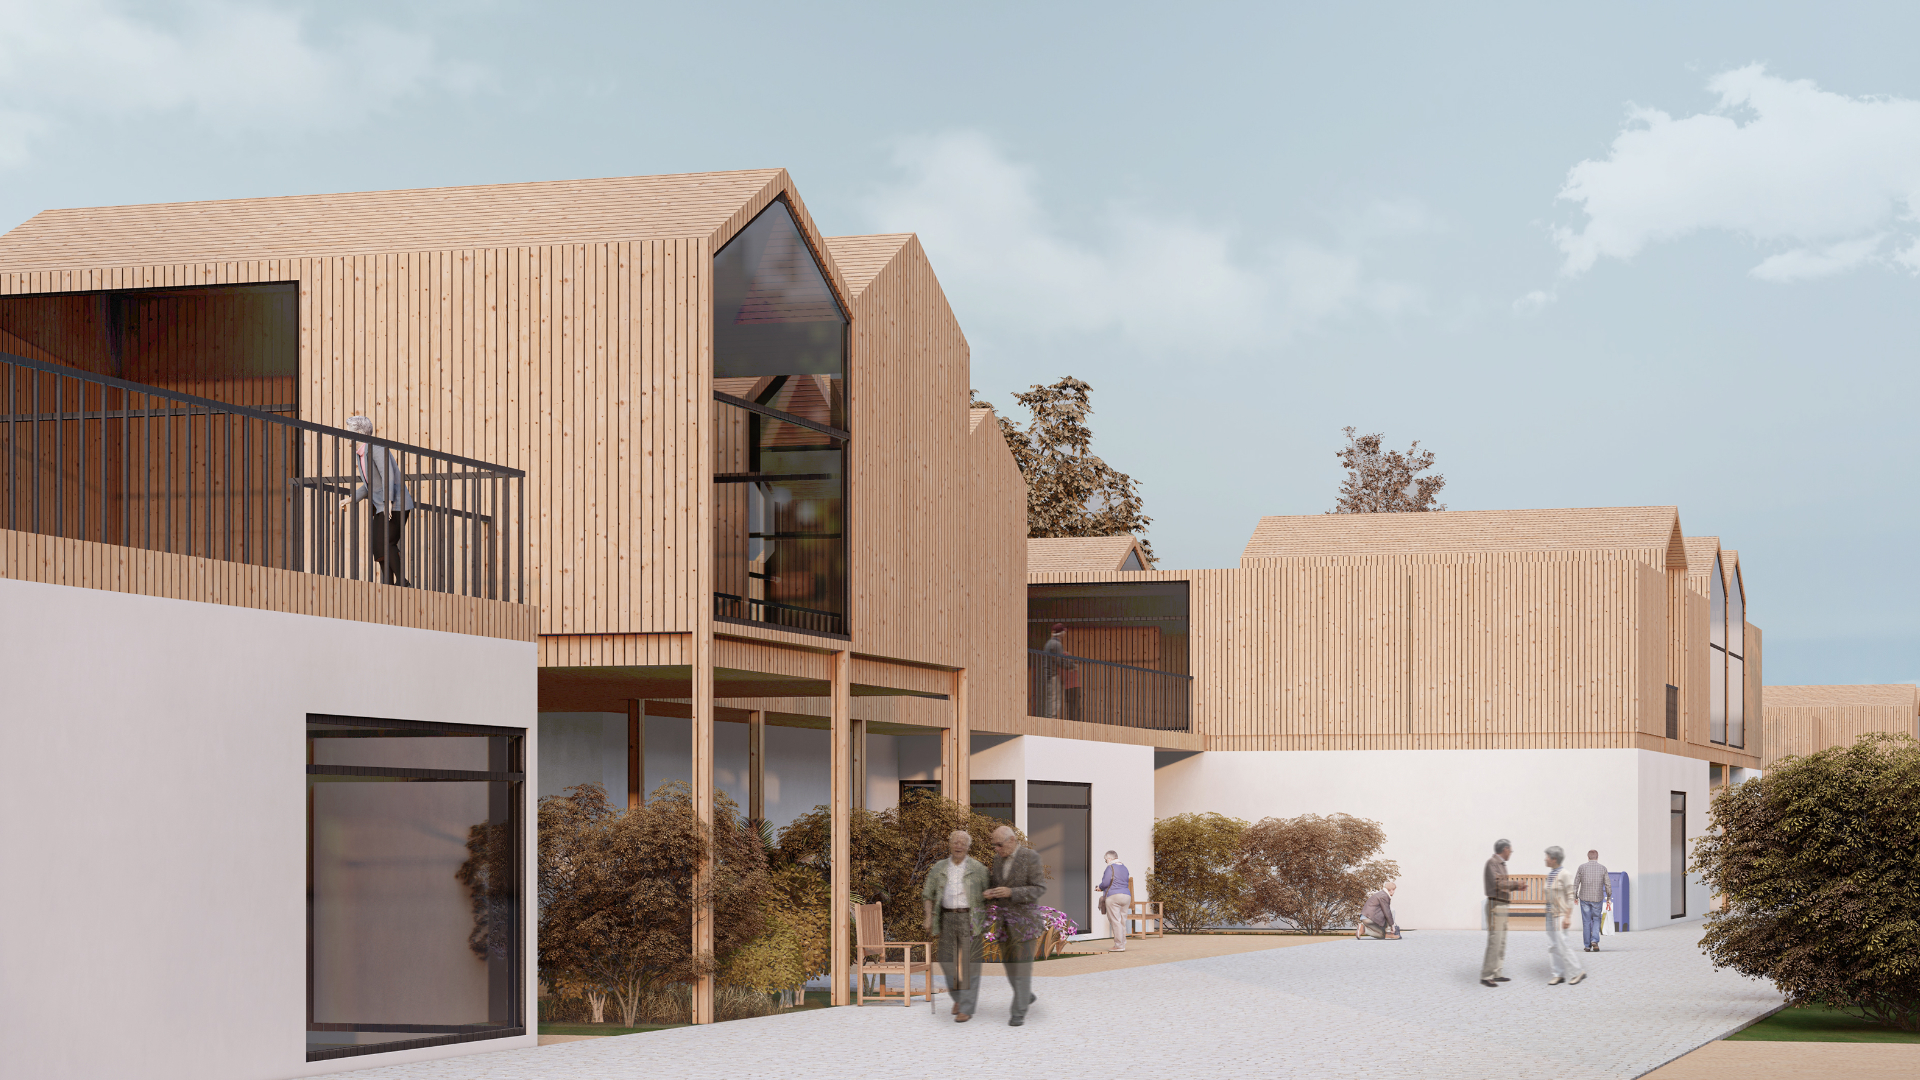 Beyond Isolation: Senior Housing Competition Winners